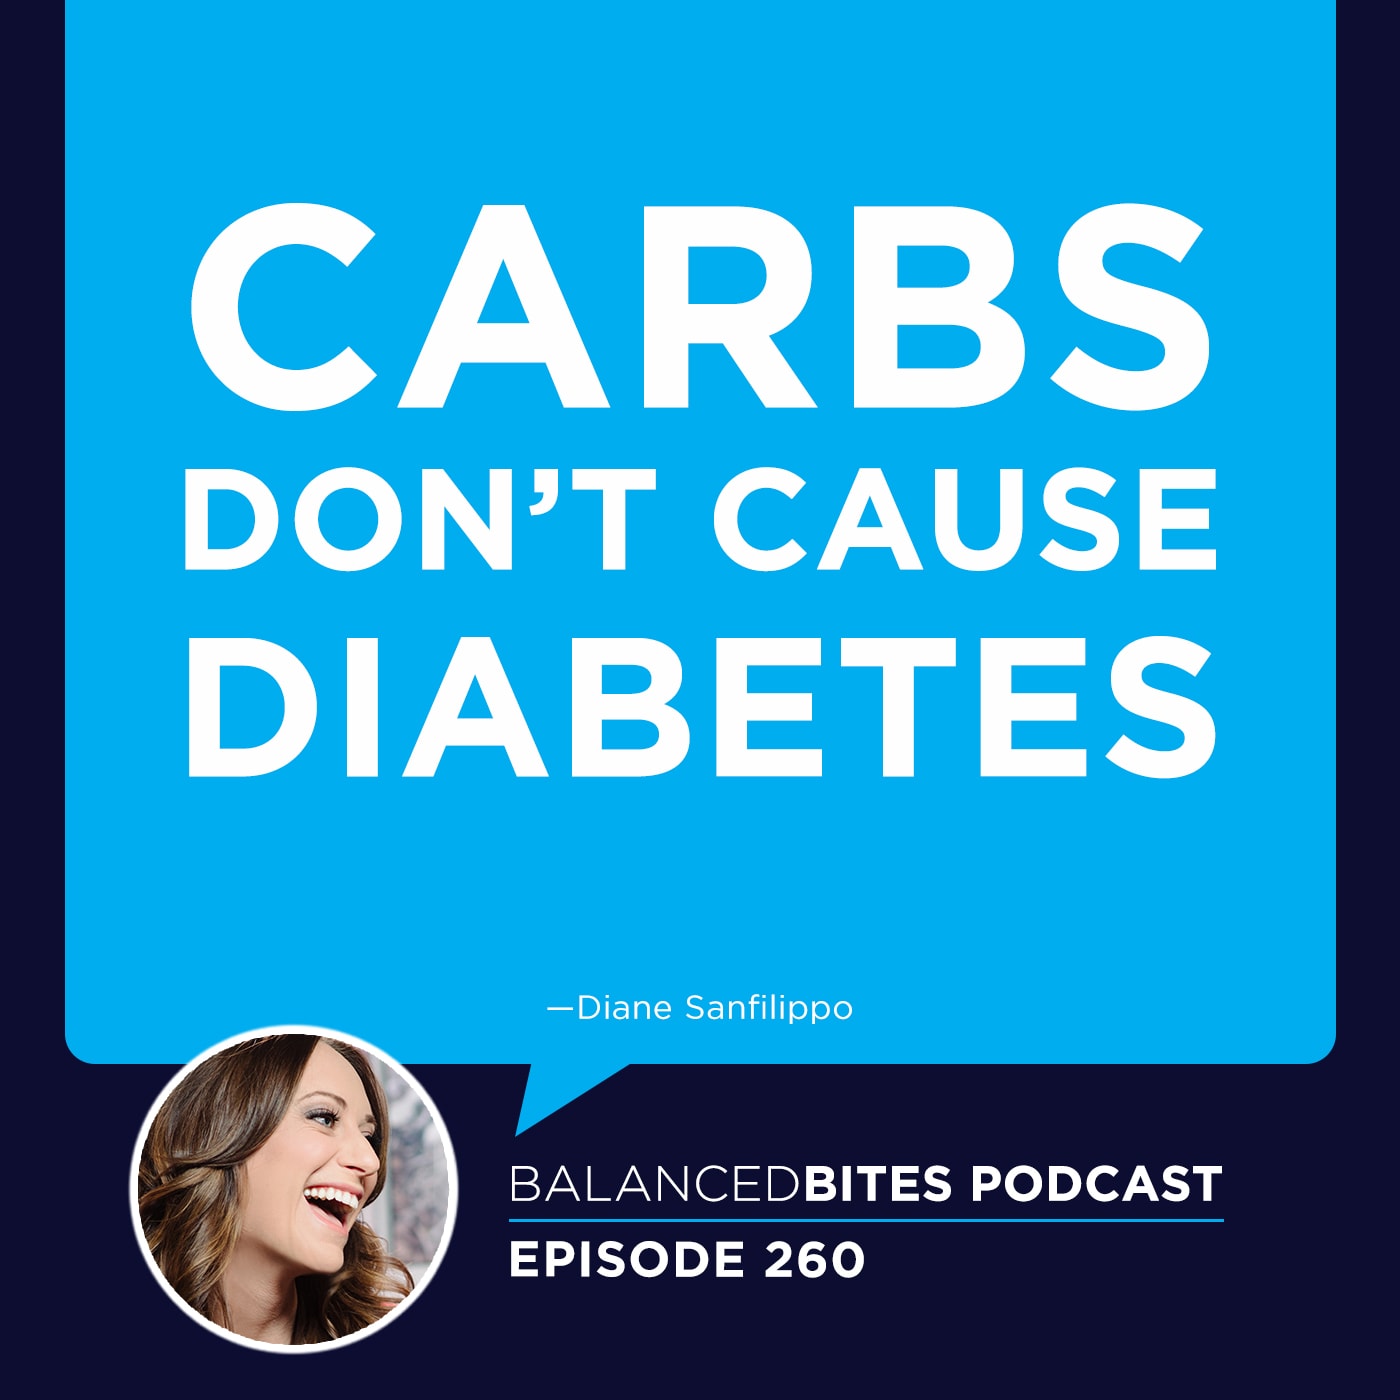 aleo Period Care, Sun Protection, Eating On-The-Go, Not Eating Red Meat, & Apple Cider Vinegar - Diane Sanfilippo, Liz Wolfe | Balanced Bites